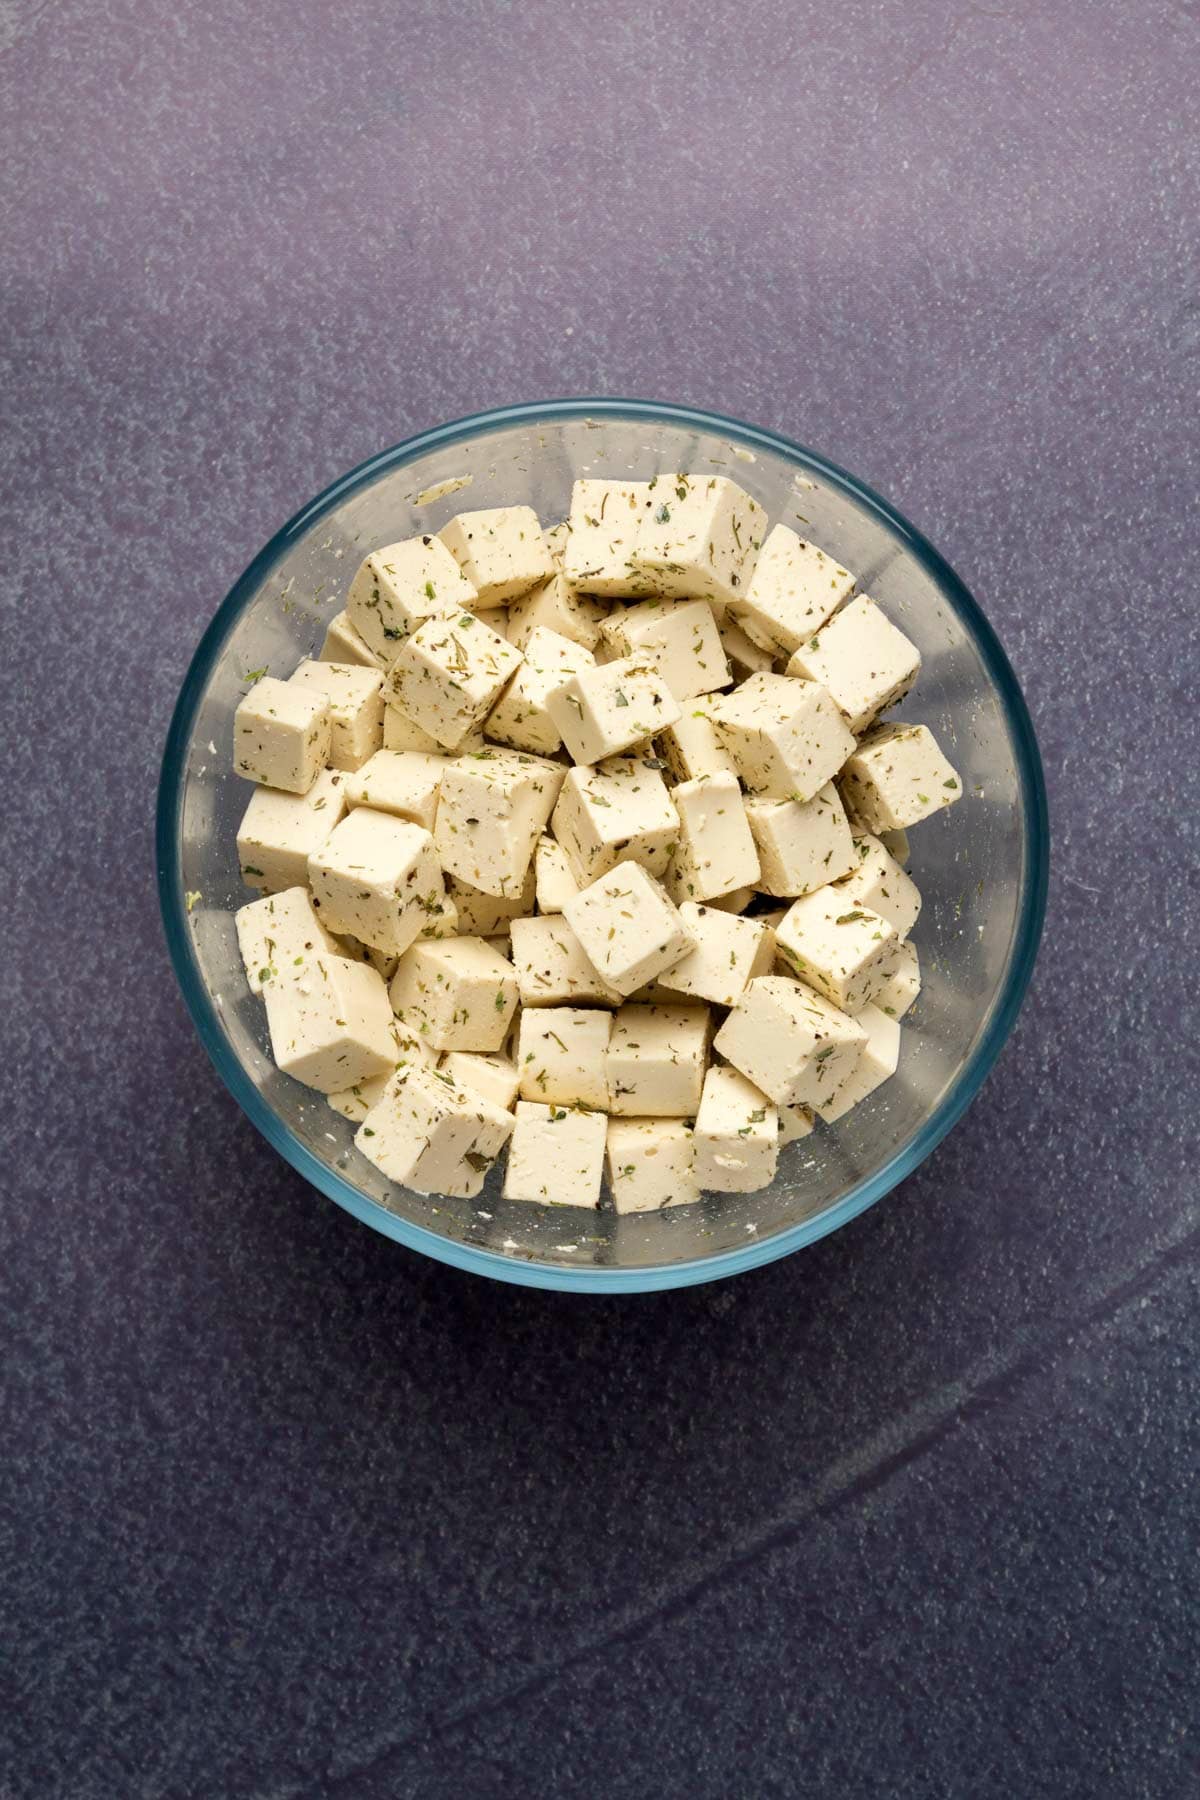 Vegan feta cubes in glass bowl with dried herbs.